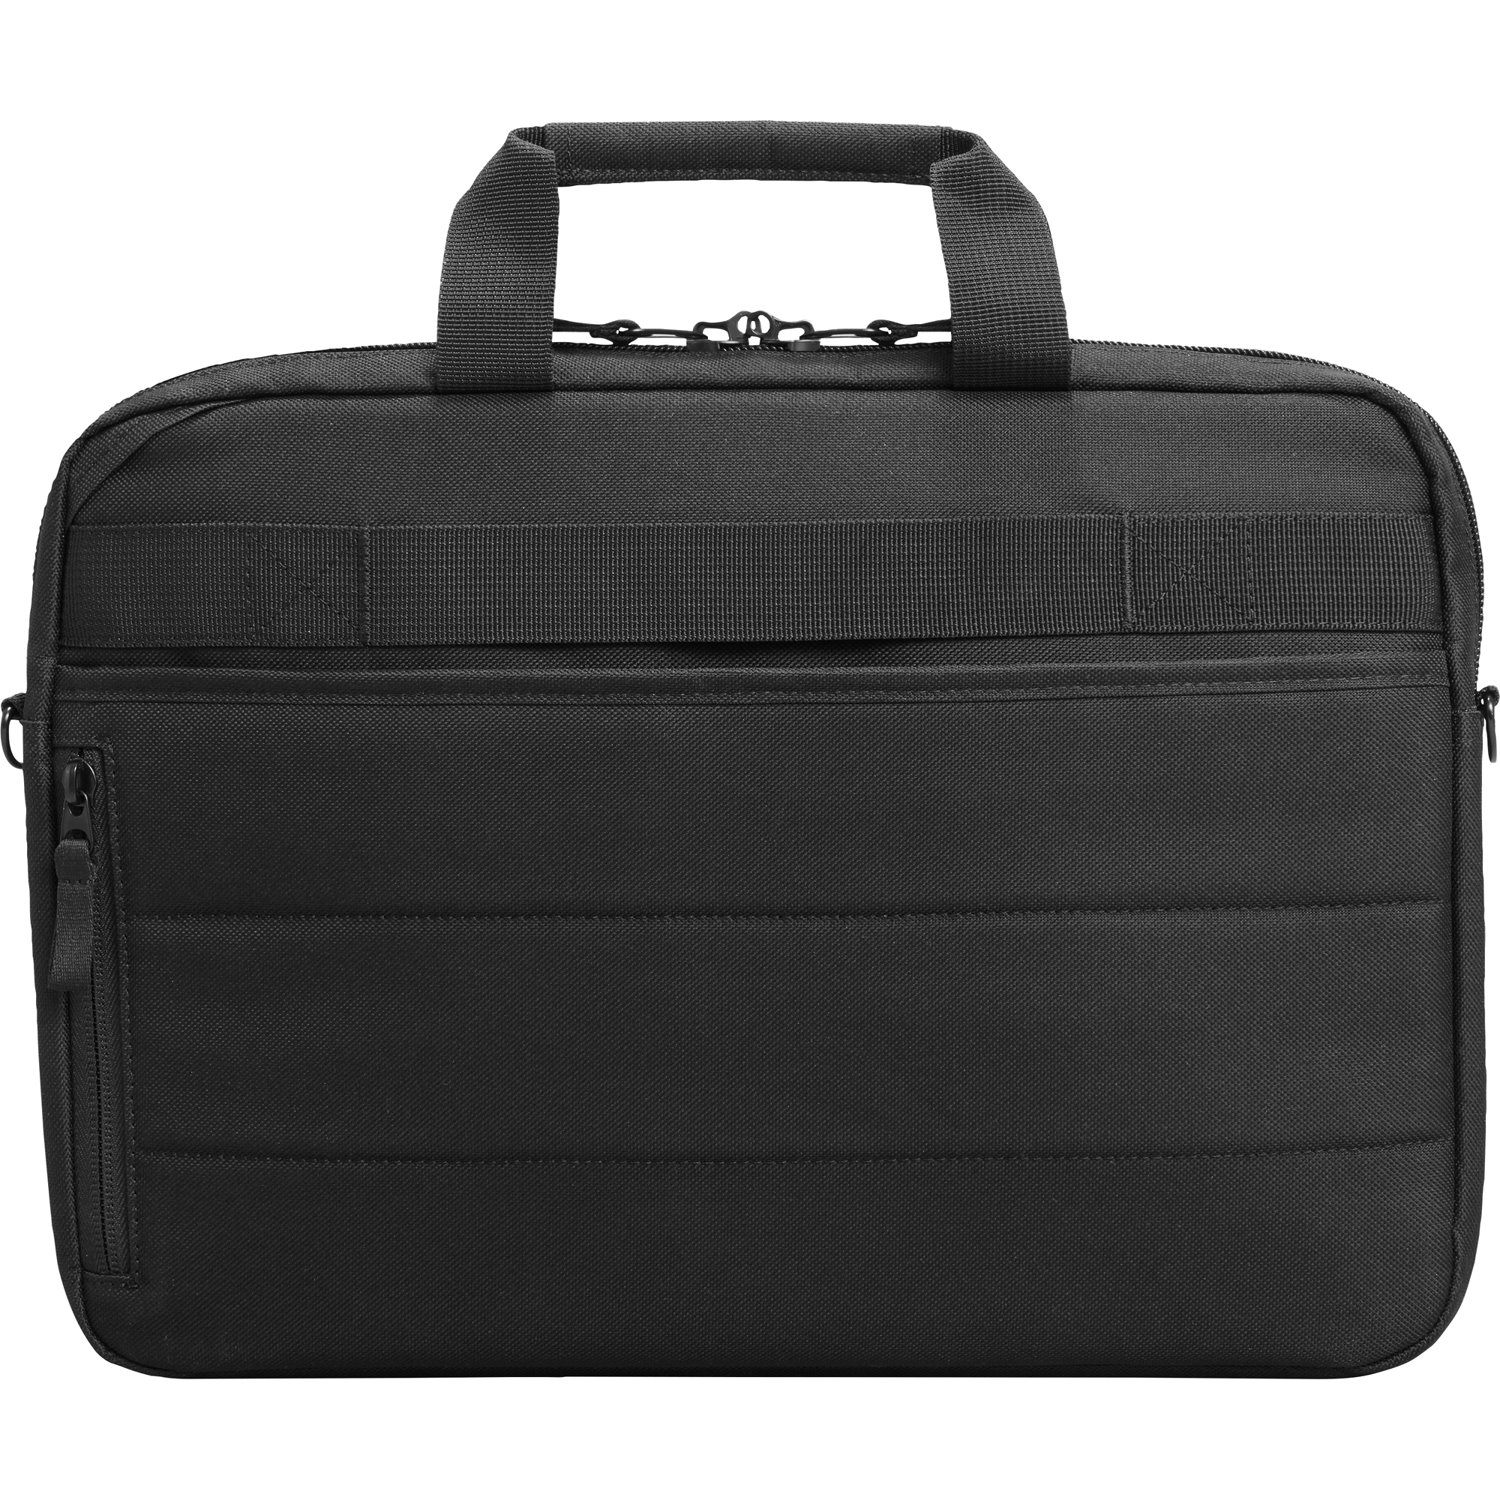 HP Renew Carrying Case for 43.9 cm (17.3") HP Notebook